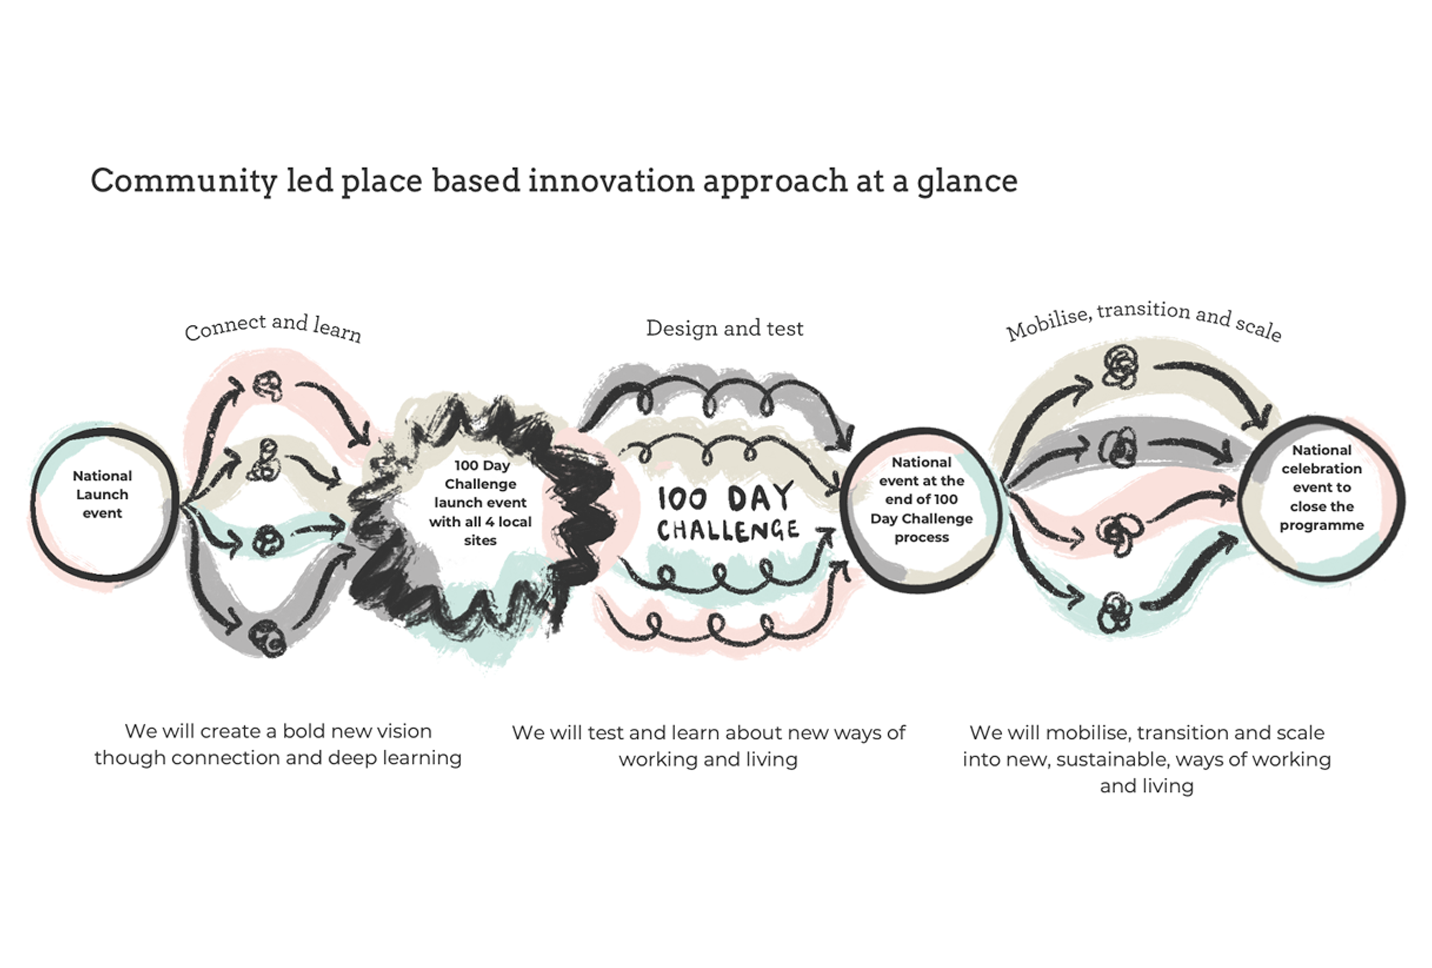 A linear diagram showing community led place based innovation approaches